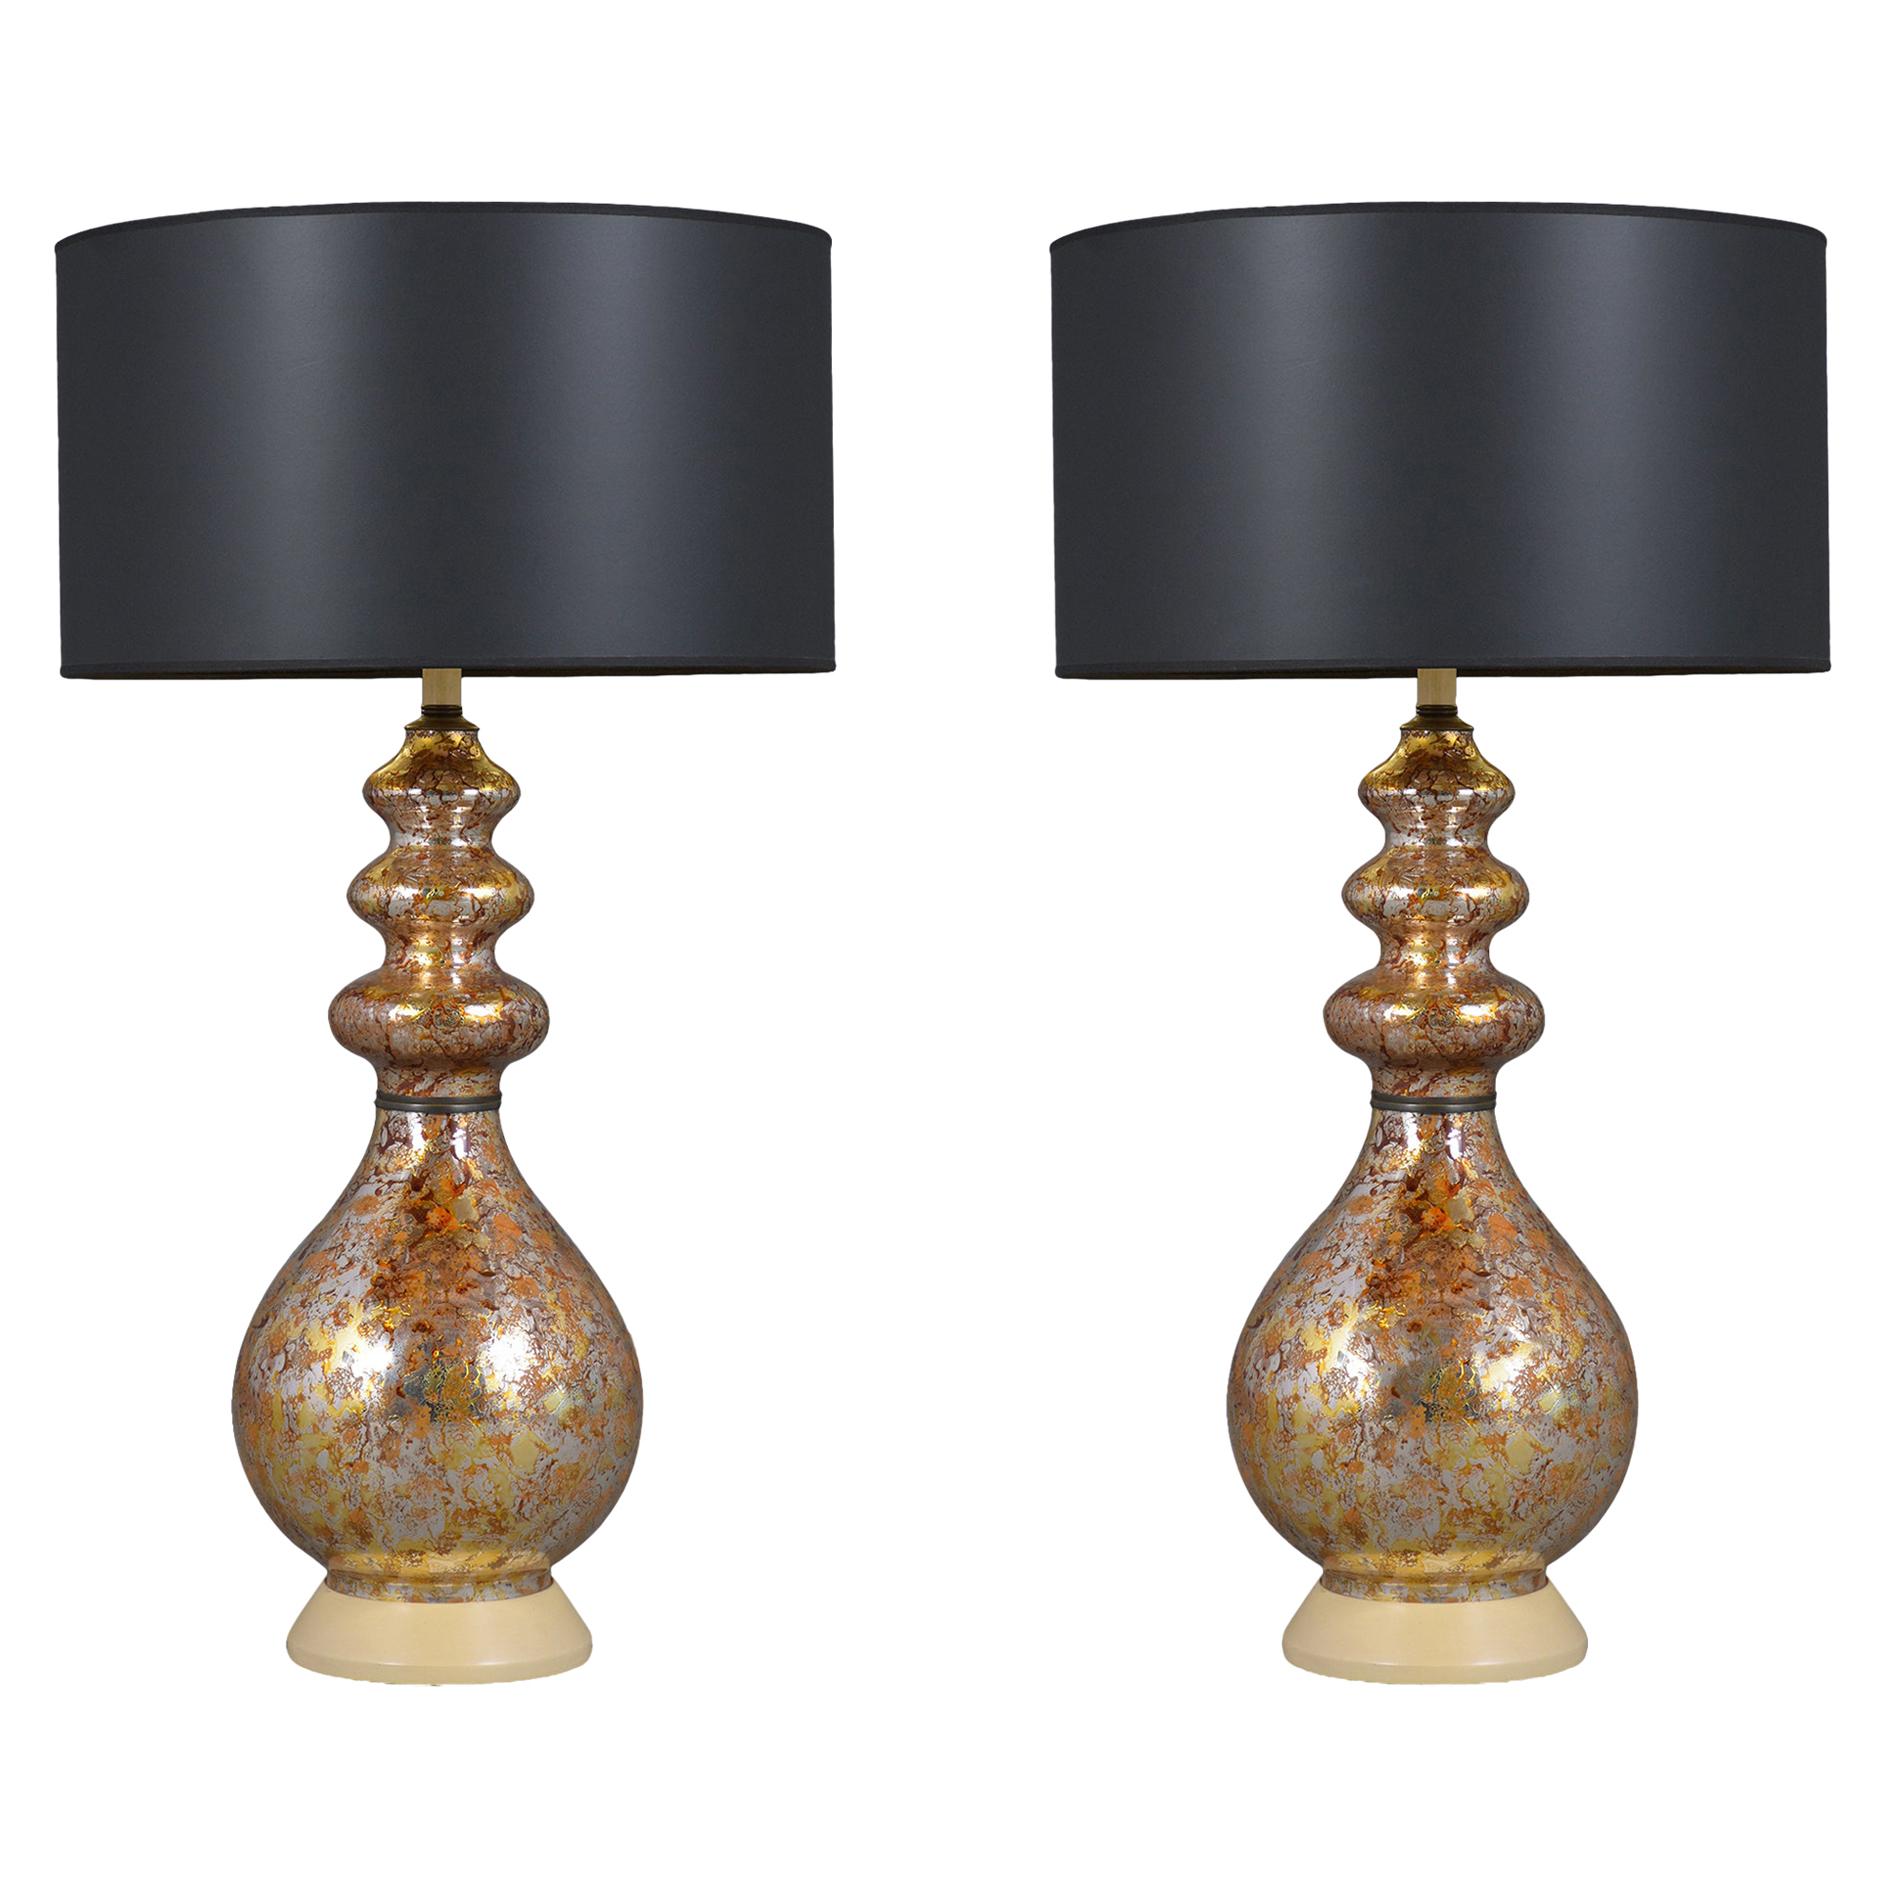 Pair of Modern Glass Table Lamps with Black & Gilt Shades - Vintage Elegance